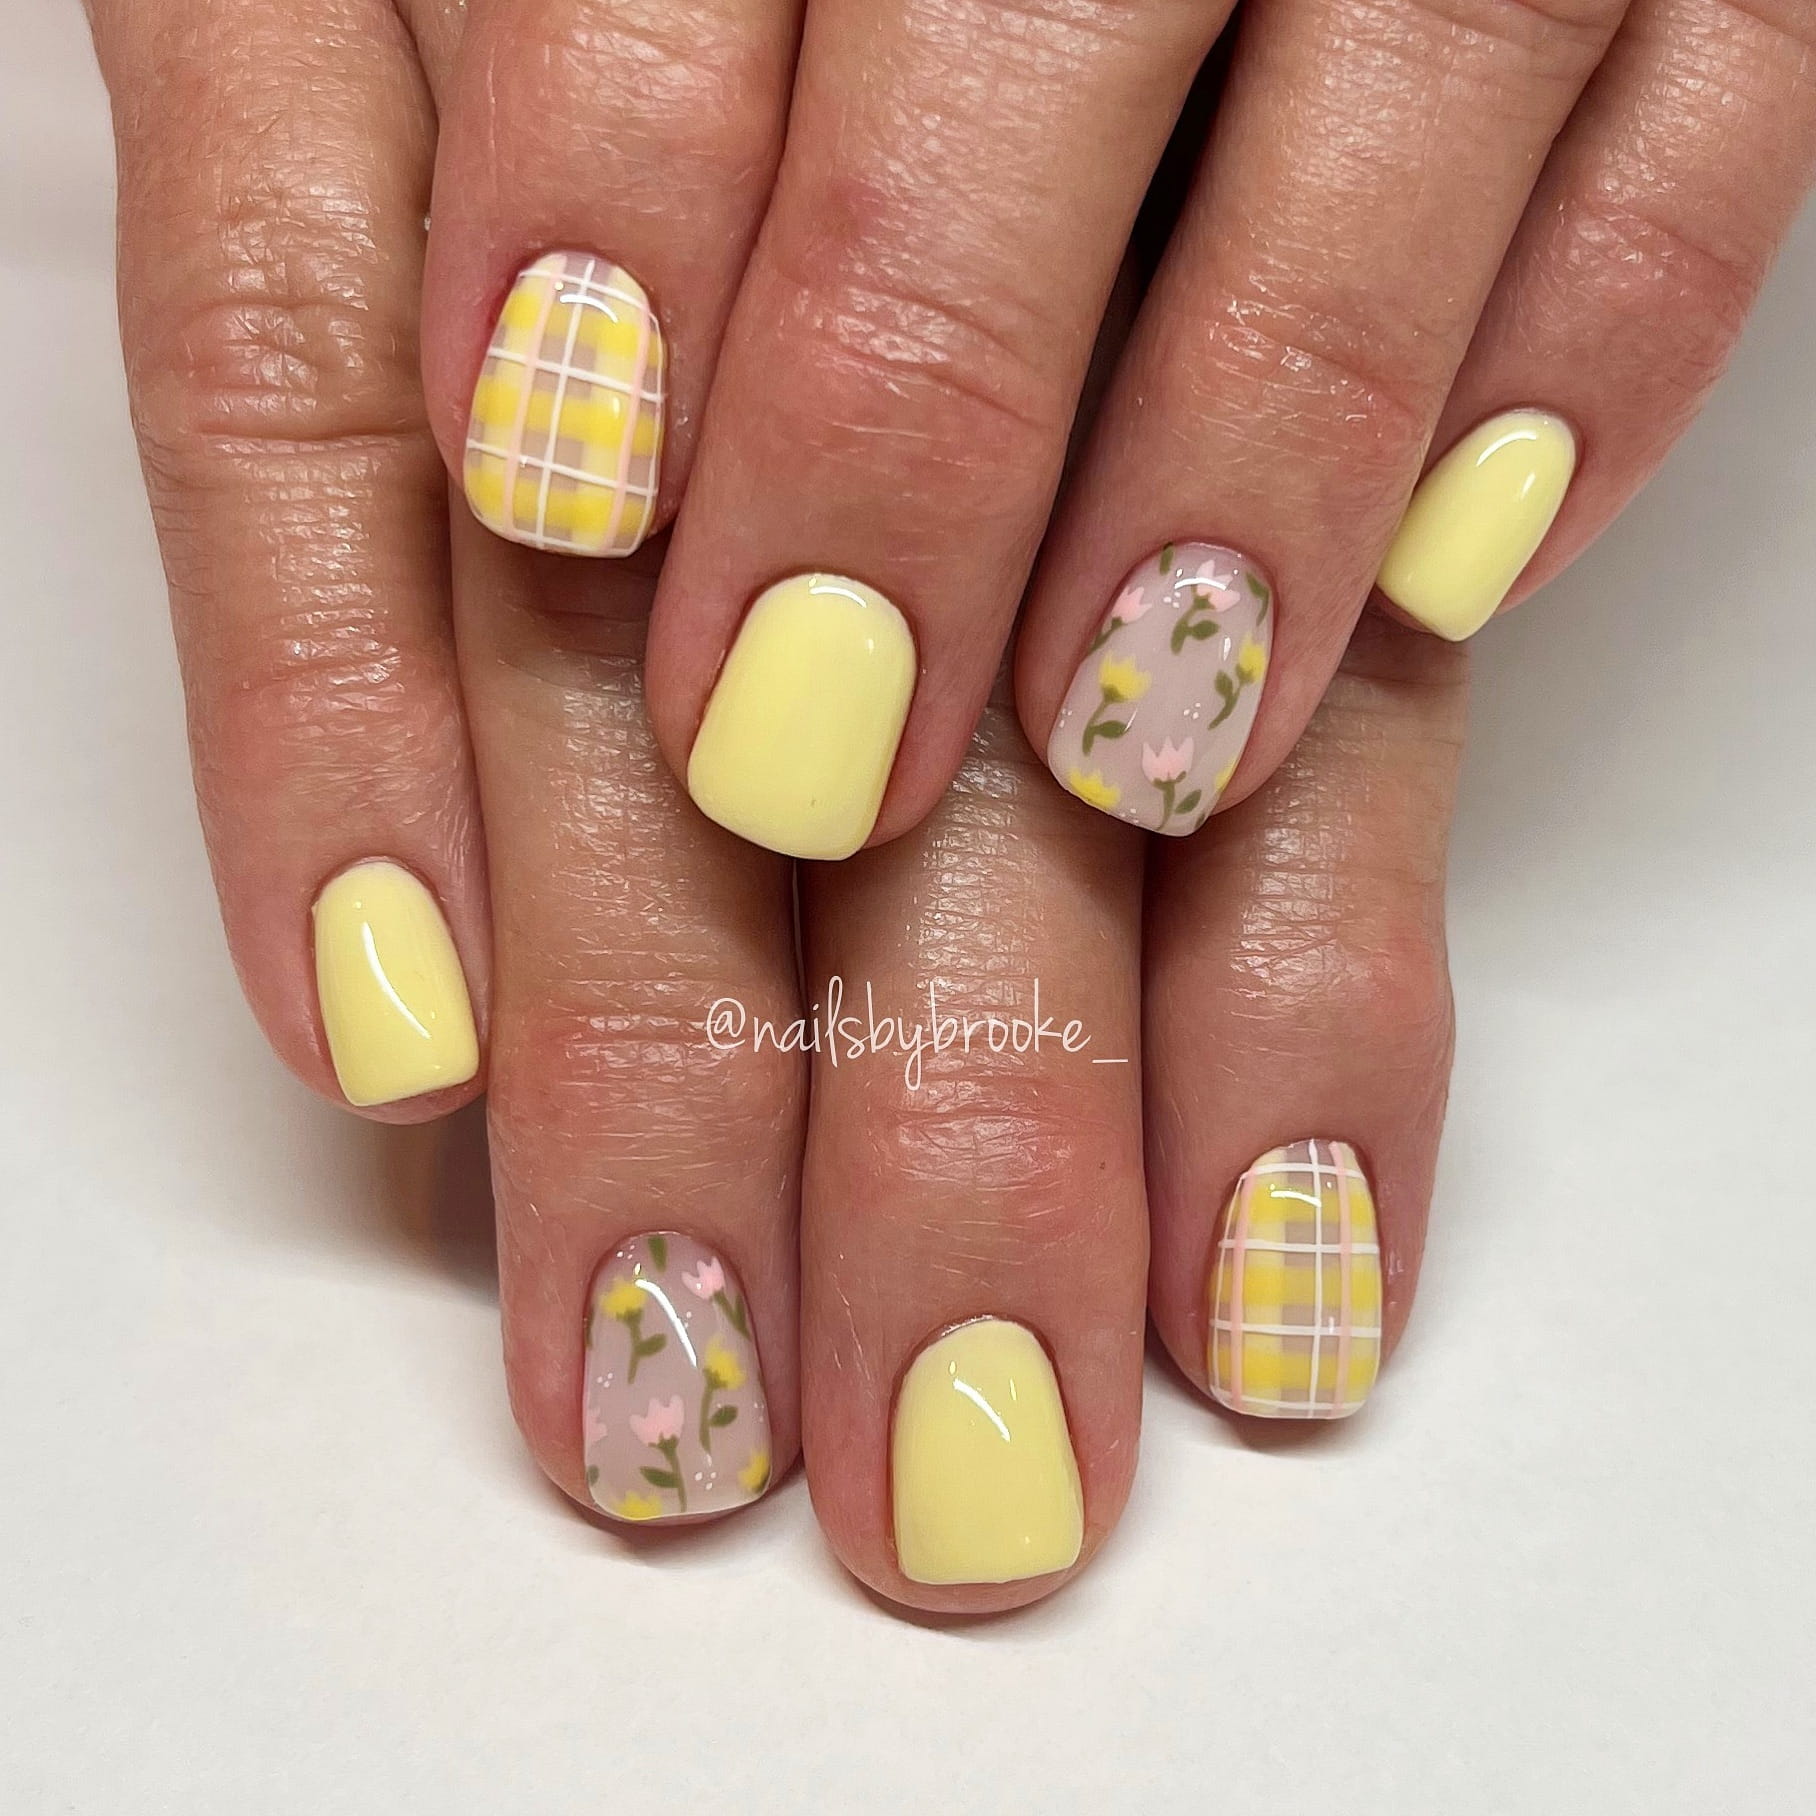 100+ Short Nail Designs You’ll Want To Try This Year images 64